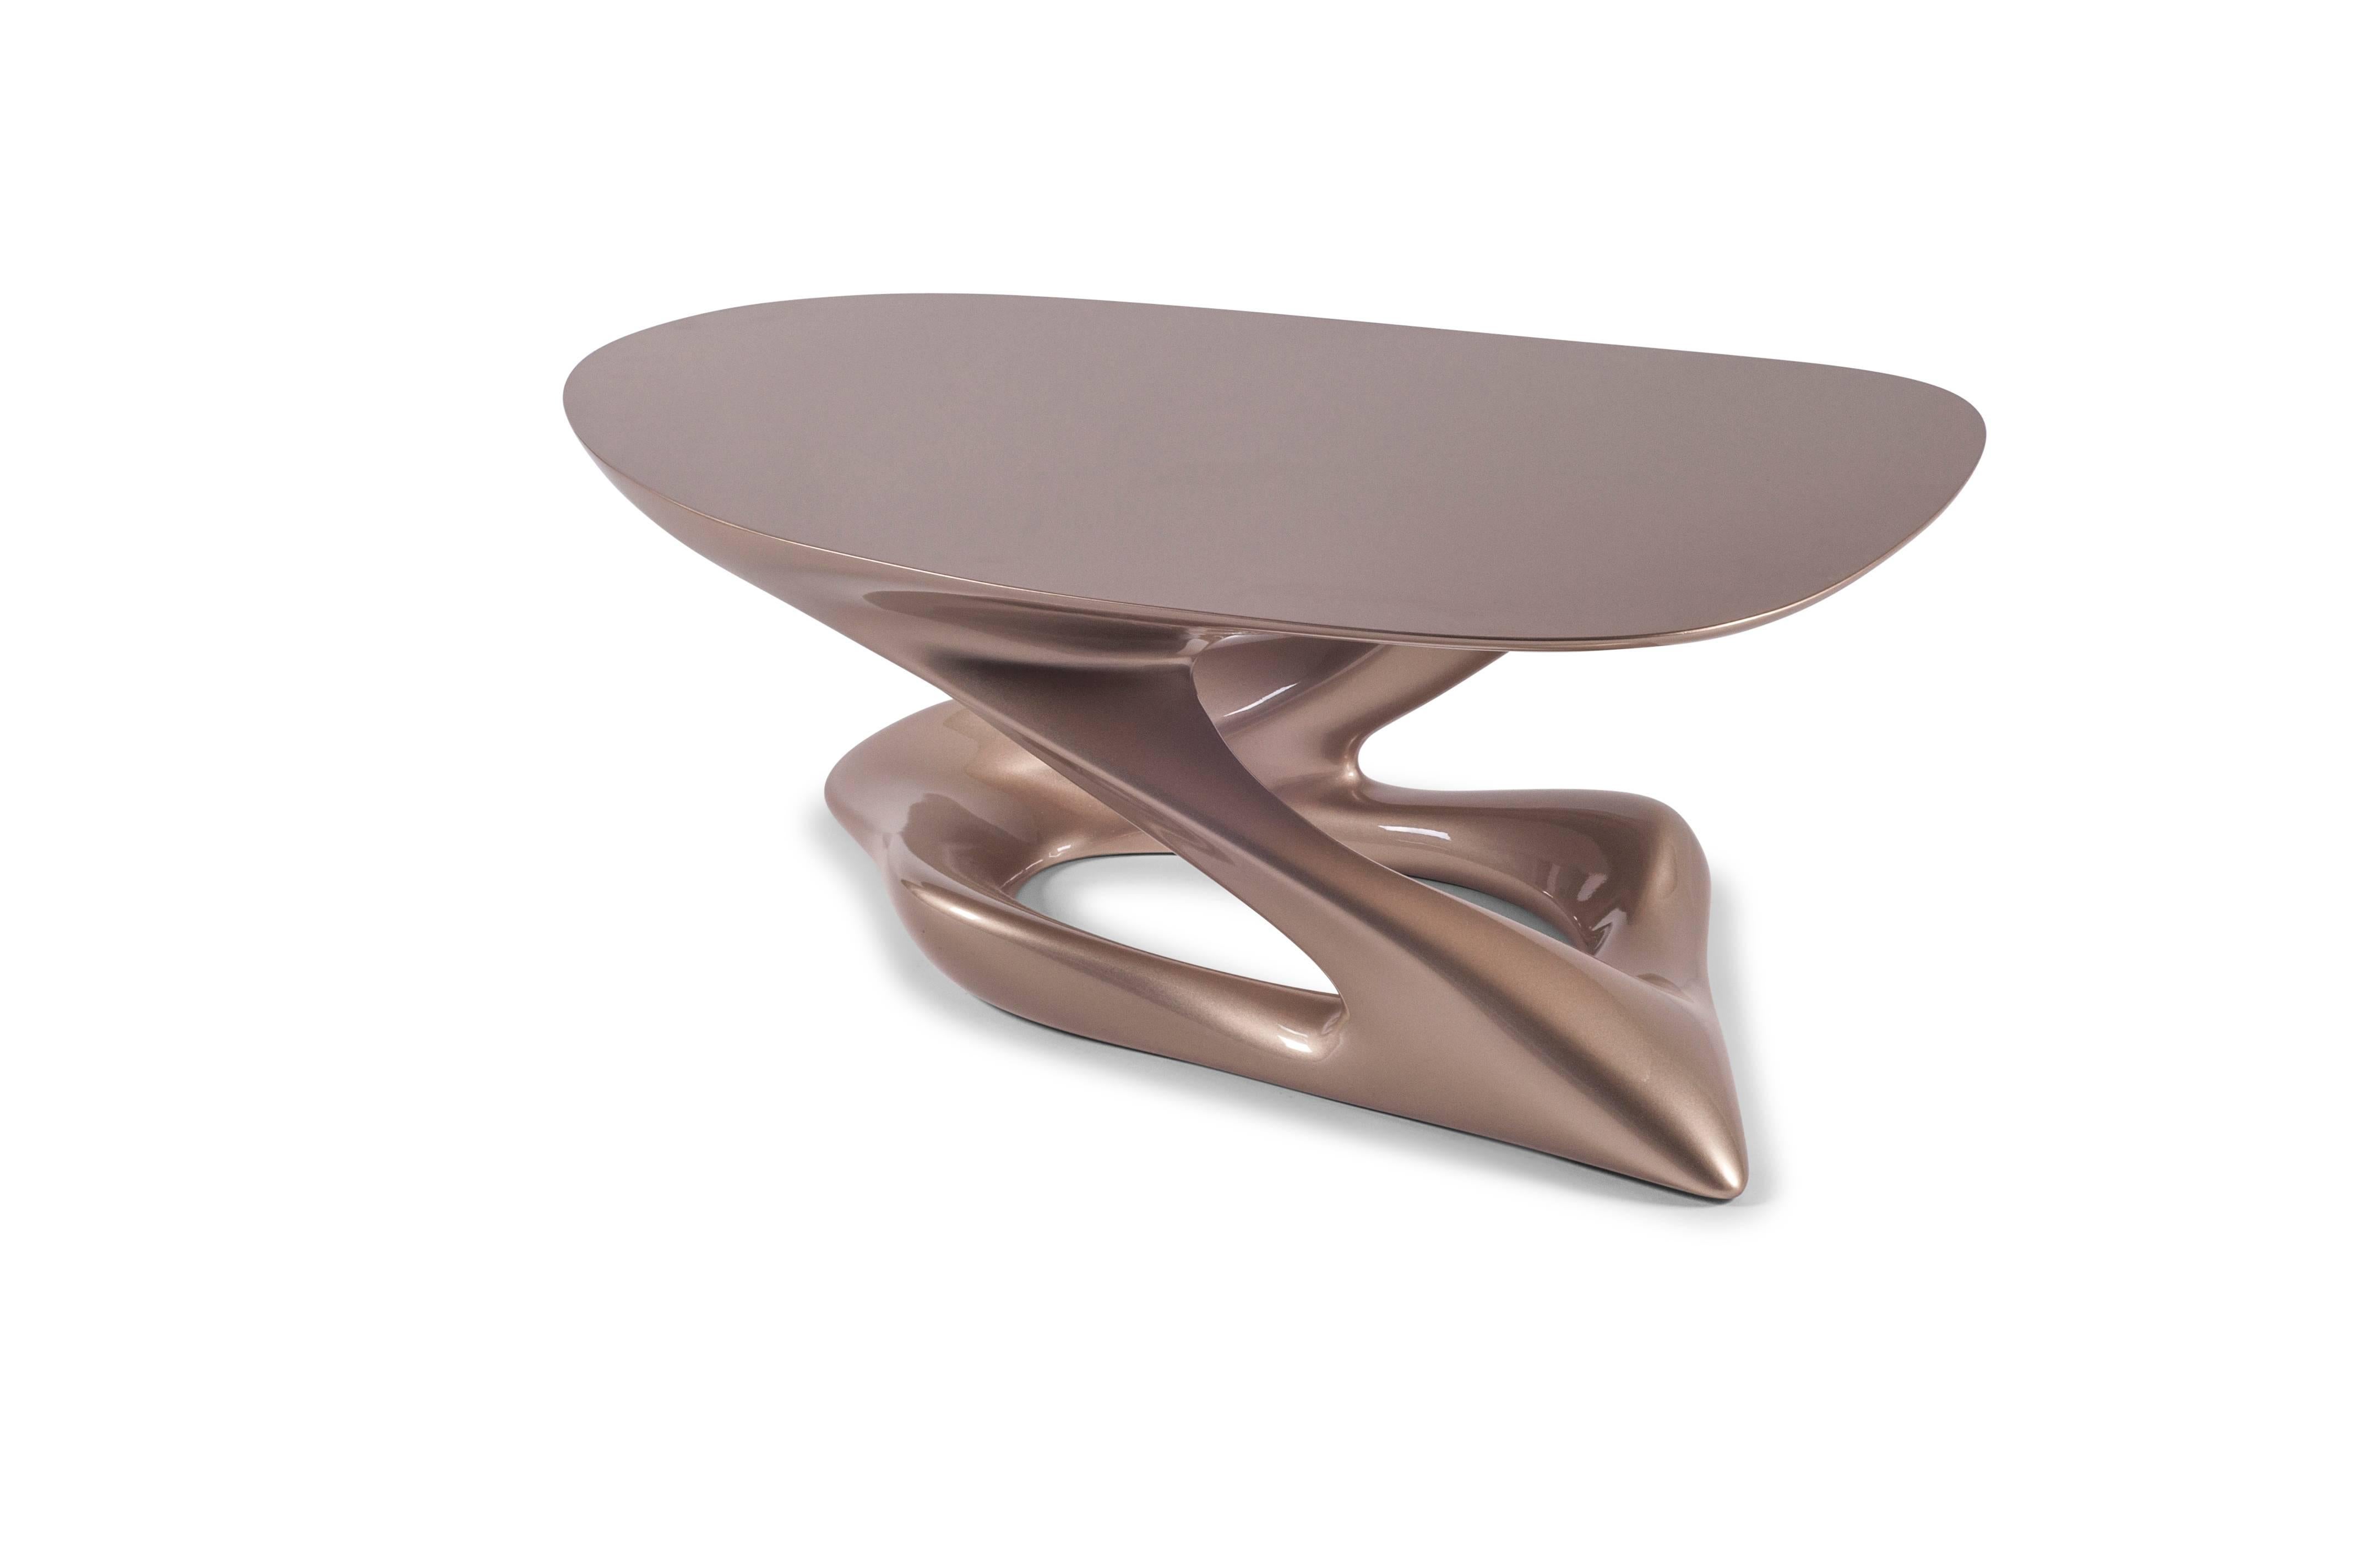 Plie coffee table is a stylish futuristic sculptural art table with a dynamic form designed and manufactured by Amorph. Plie is made out of solid MDF with metallic lacquer finish.

About Amorph: 
Amorph is a design and manufacturing company based in